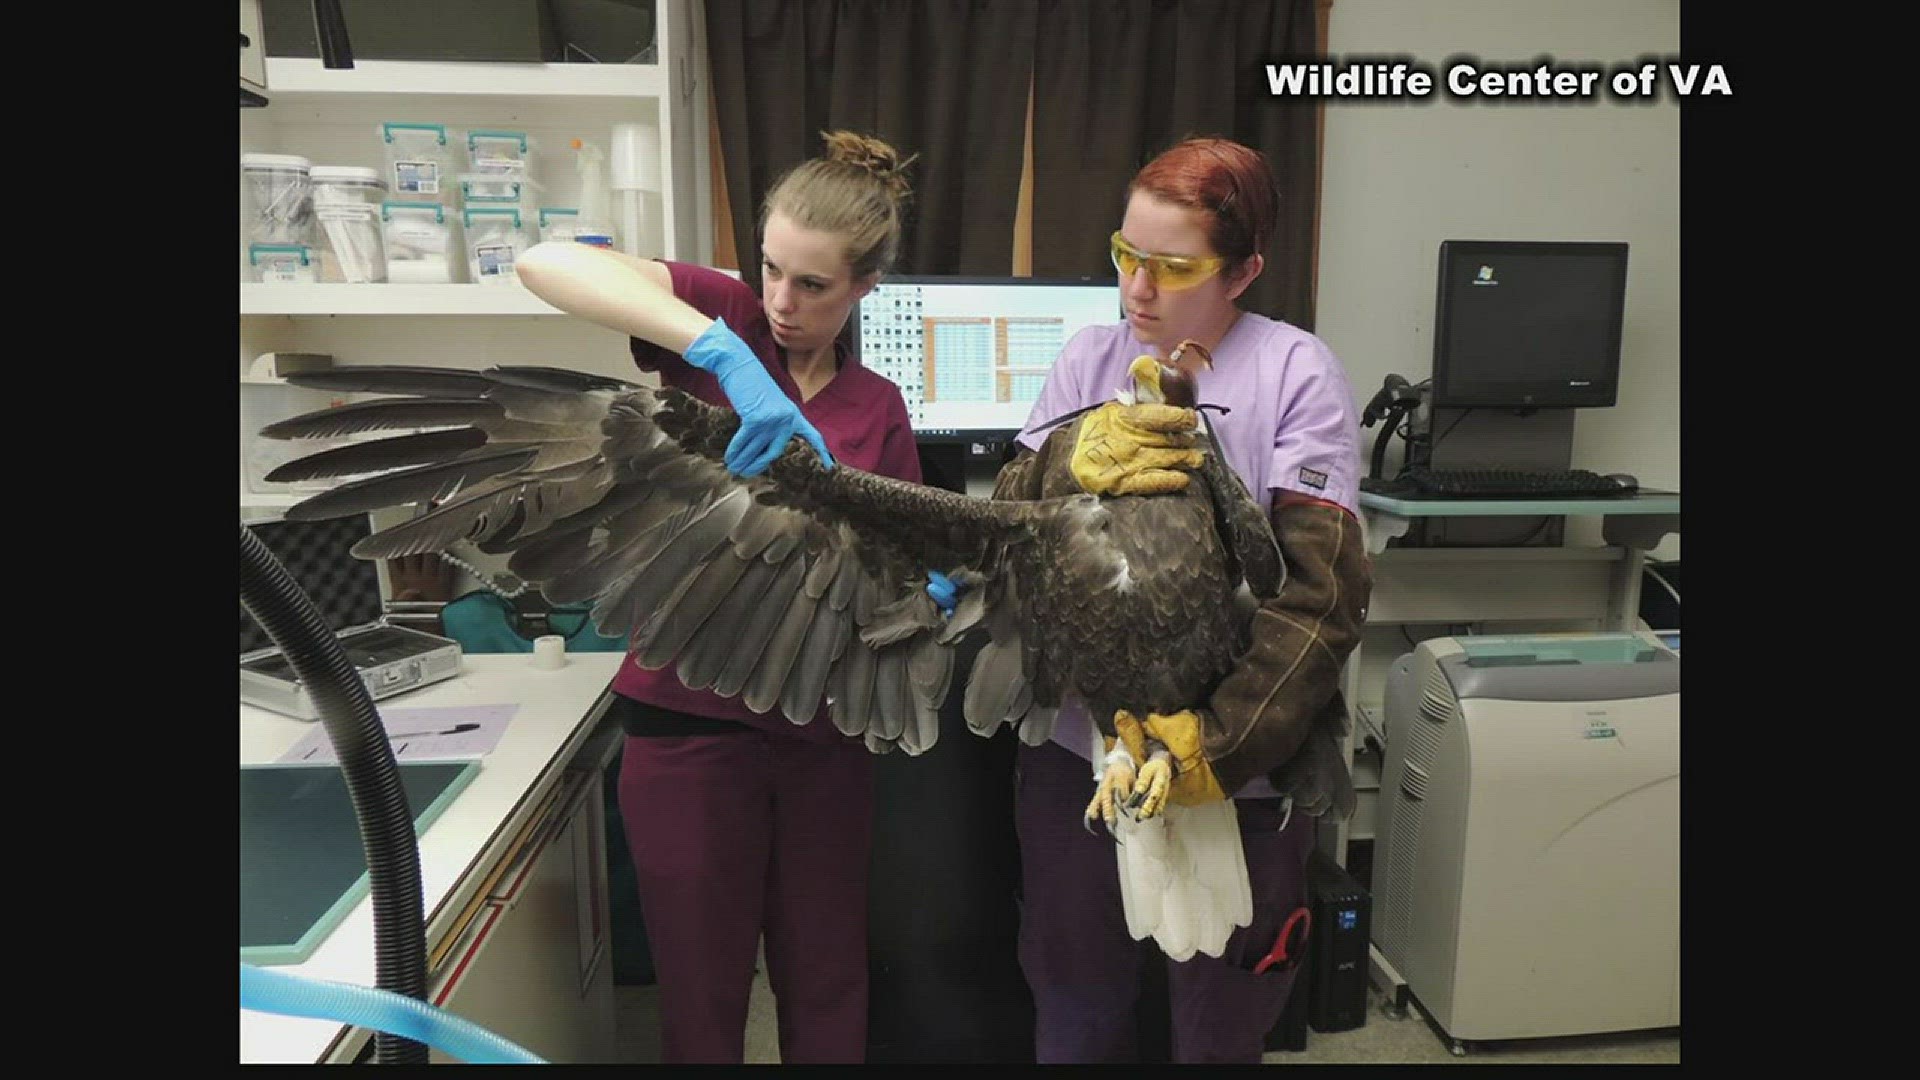 HK, an eagle born at Norfolk Botanical Garden in 2009, was hit by a car recently and will undergo surgery.